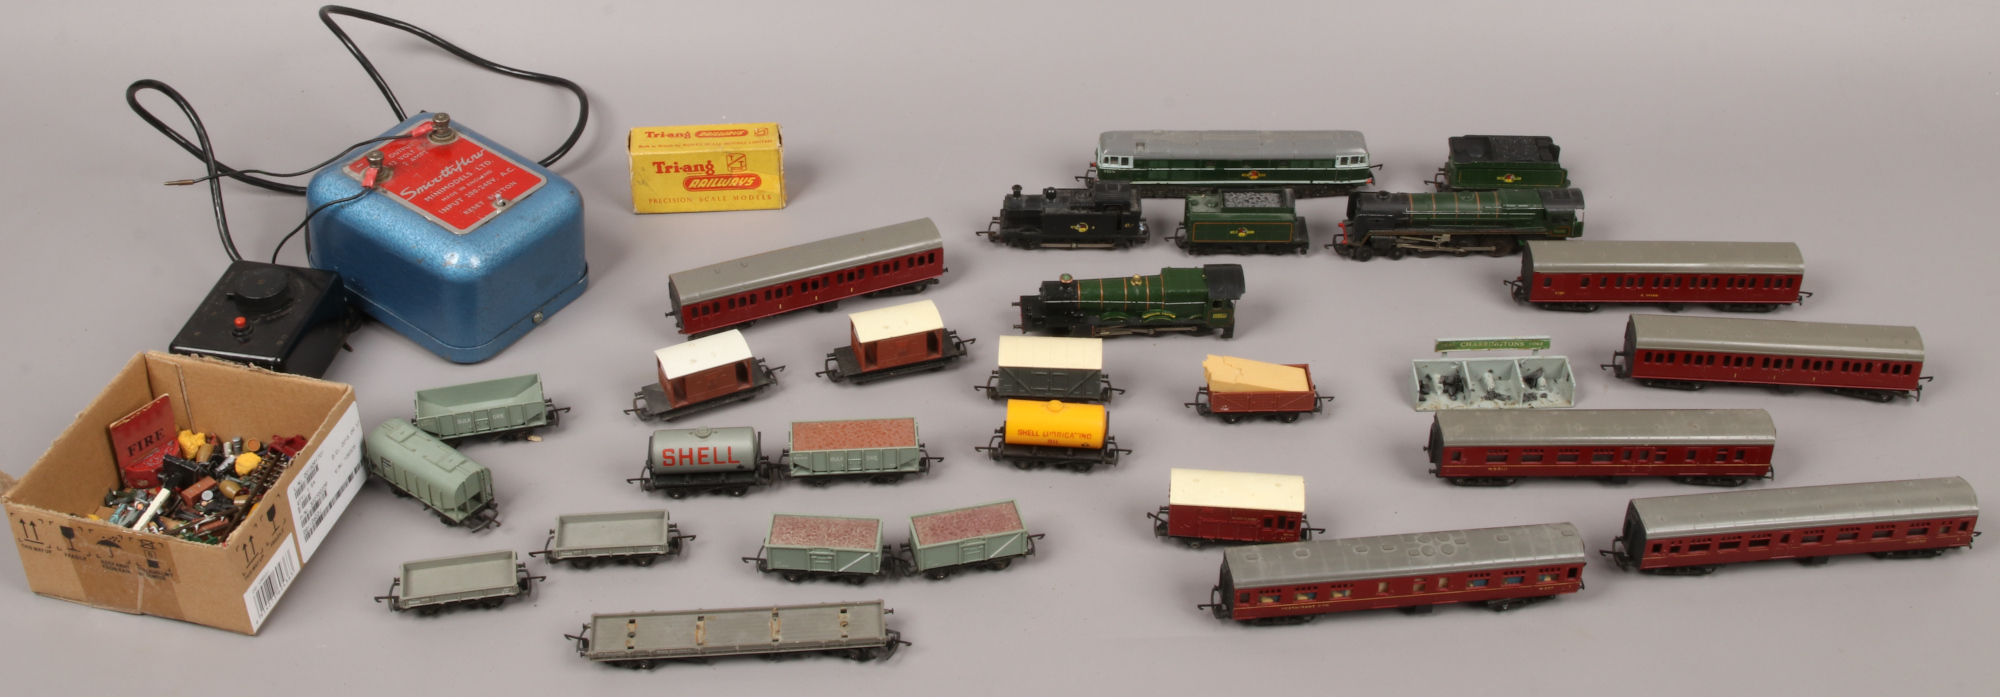 A collection of Triang TT gauge railway engines, rolling stock, track side buildings and accessories - Image 2 of 4